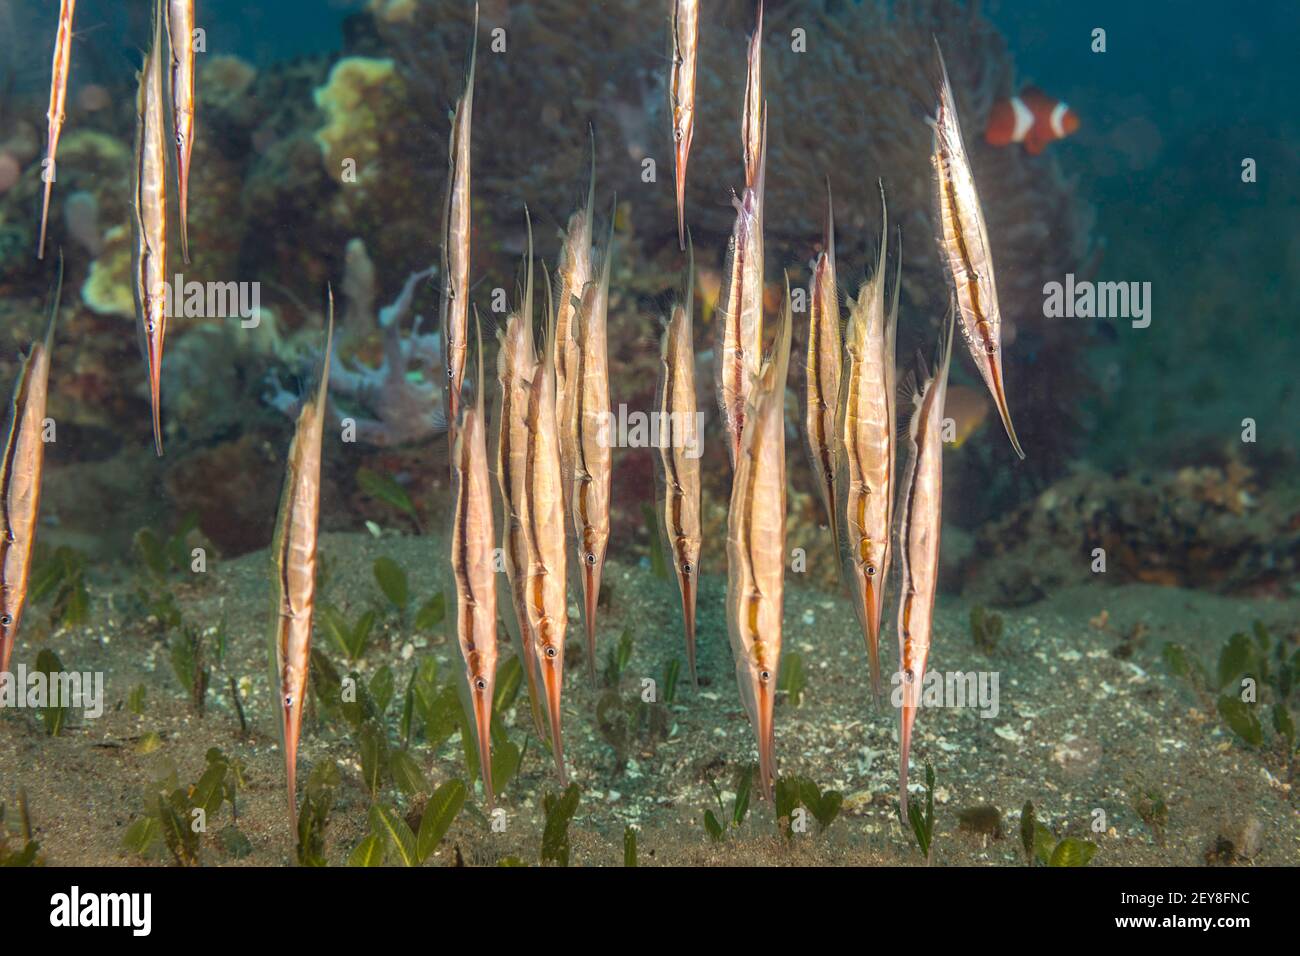 Schooling shrimpfish, Aeoliscus strigatus, swim in a vertical, head-down, position and feed on minute planktonic crustaceans. Philippines. Stock Photo